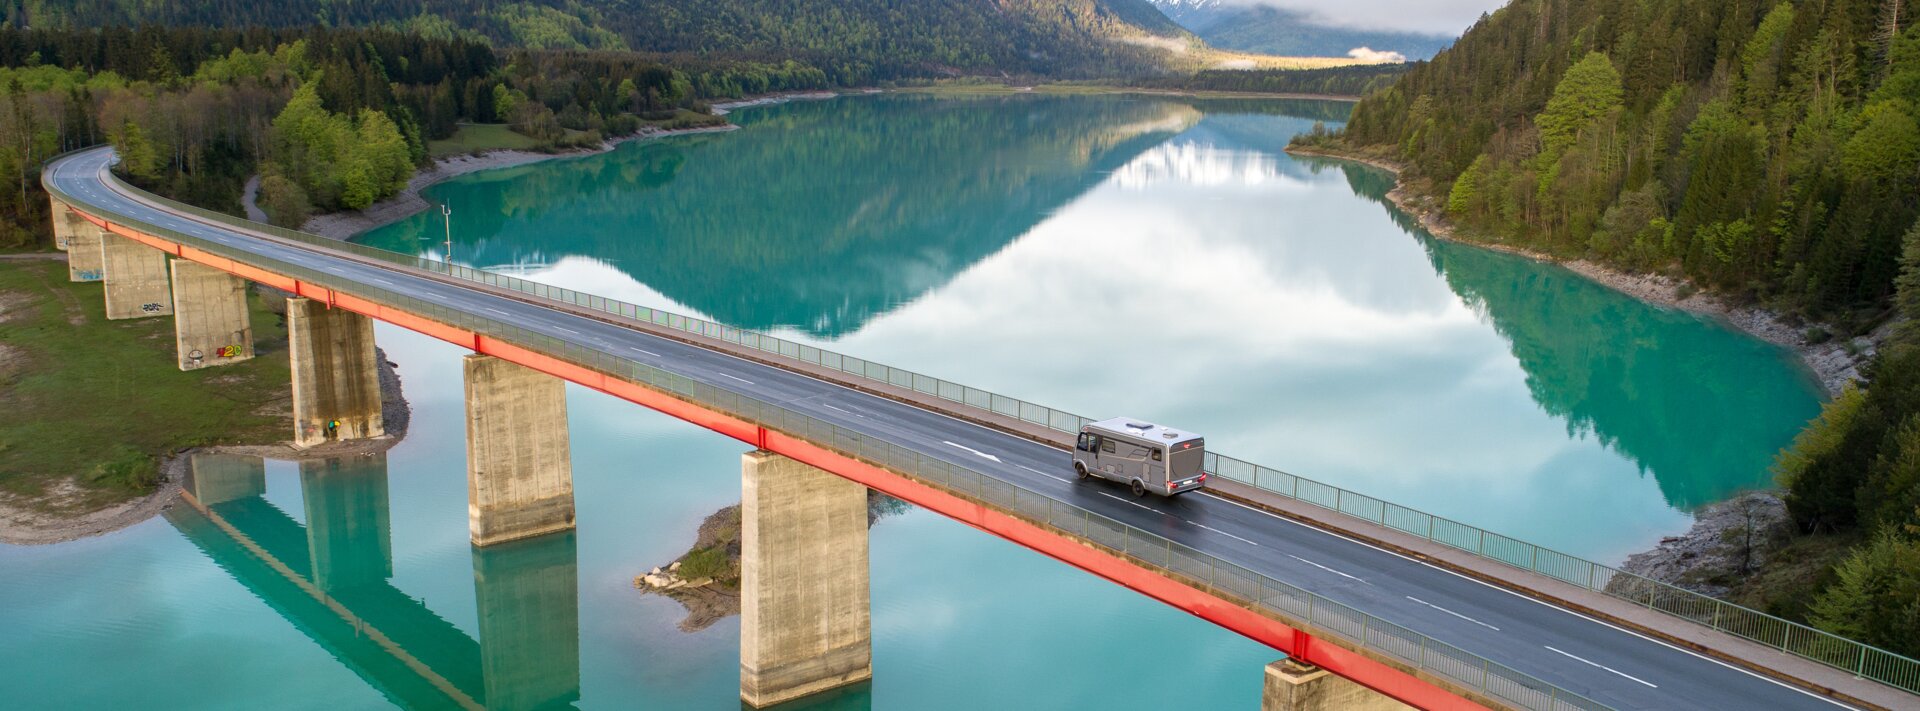 HYMER B-Class ModernComfort I on a bridge with concrete pillars, turquoise lake, surrounded by forest